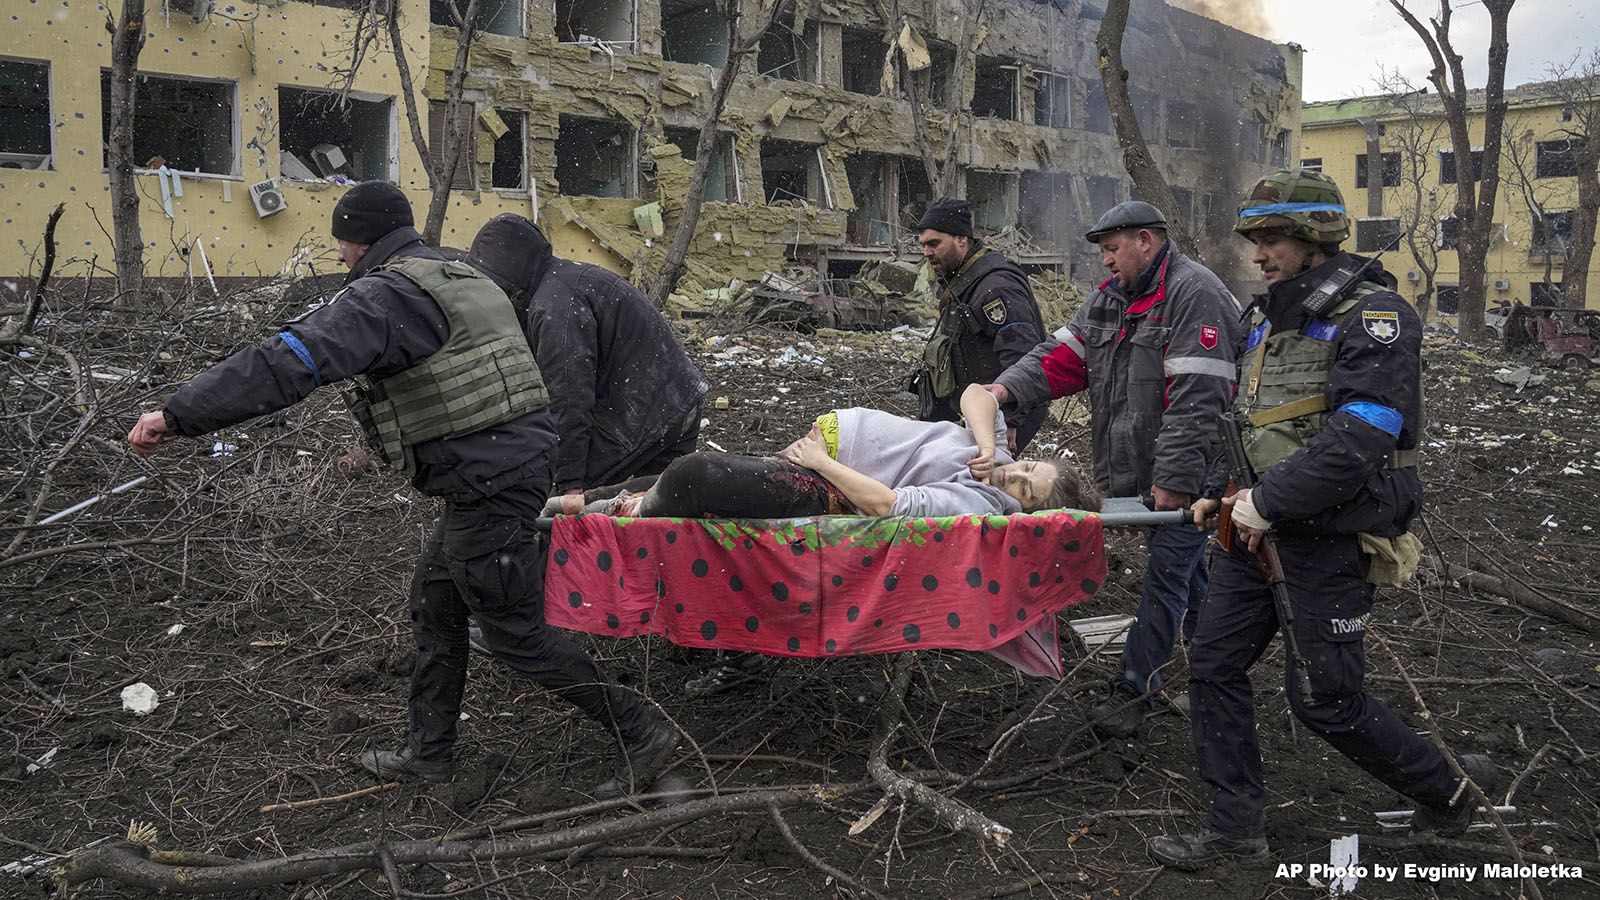 Ukrainian emergency employees and police officers evacuate injured pregnant woman Iryna Kalinina, 32, from a maternity hospital that was damaged by a Russian airstrike in Mariupol, Ukraine, March 9, 2022. The image was part of a series of images by Associated Press photographers that was awarded the 2023 Pulitzer Prize for Breaking News Photography.